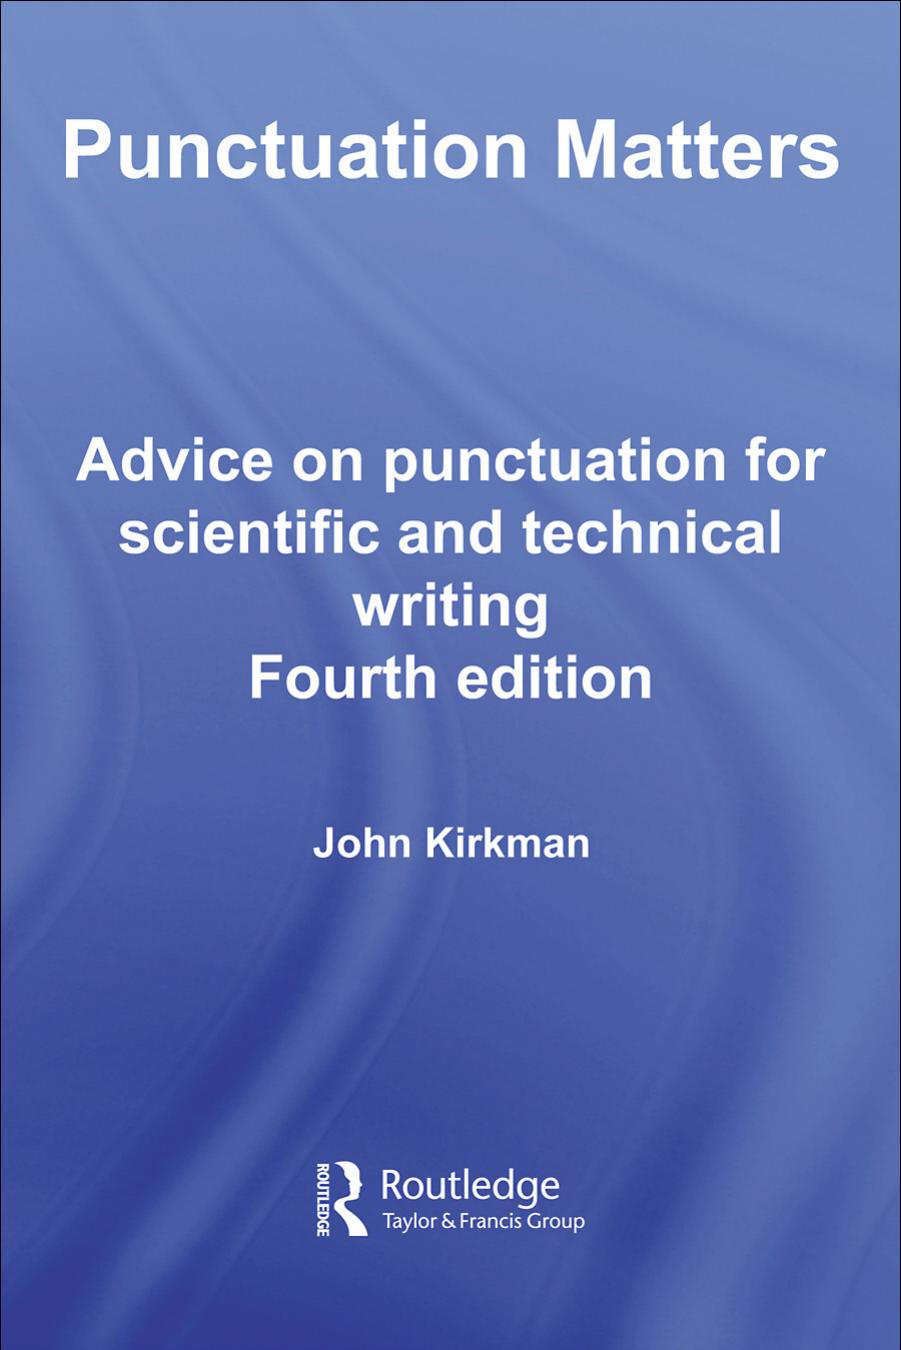 Punctuation Matters Advice on punctuation for scientific and technical writing: Fourth edition